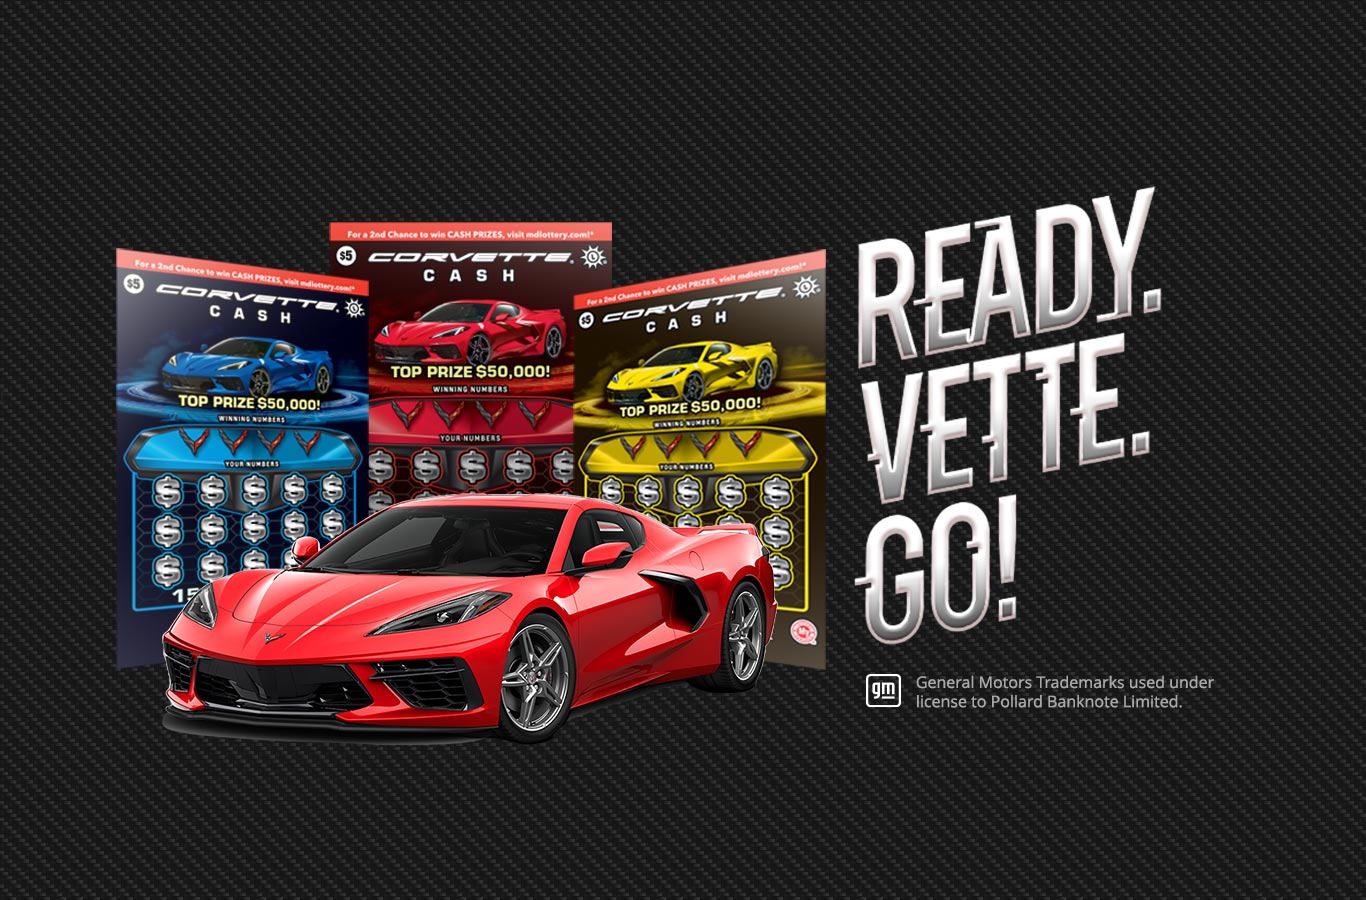 Get your motor runnin'! With an instant top prize of $50,000 and a second-chance top prize of $150,000, enough for a new Corvette Z06.